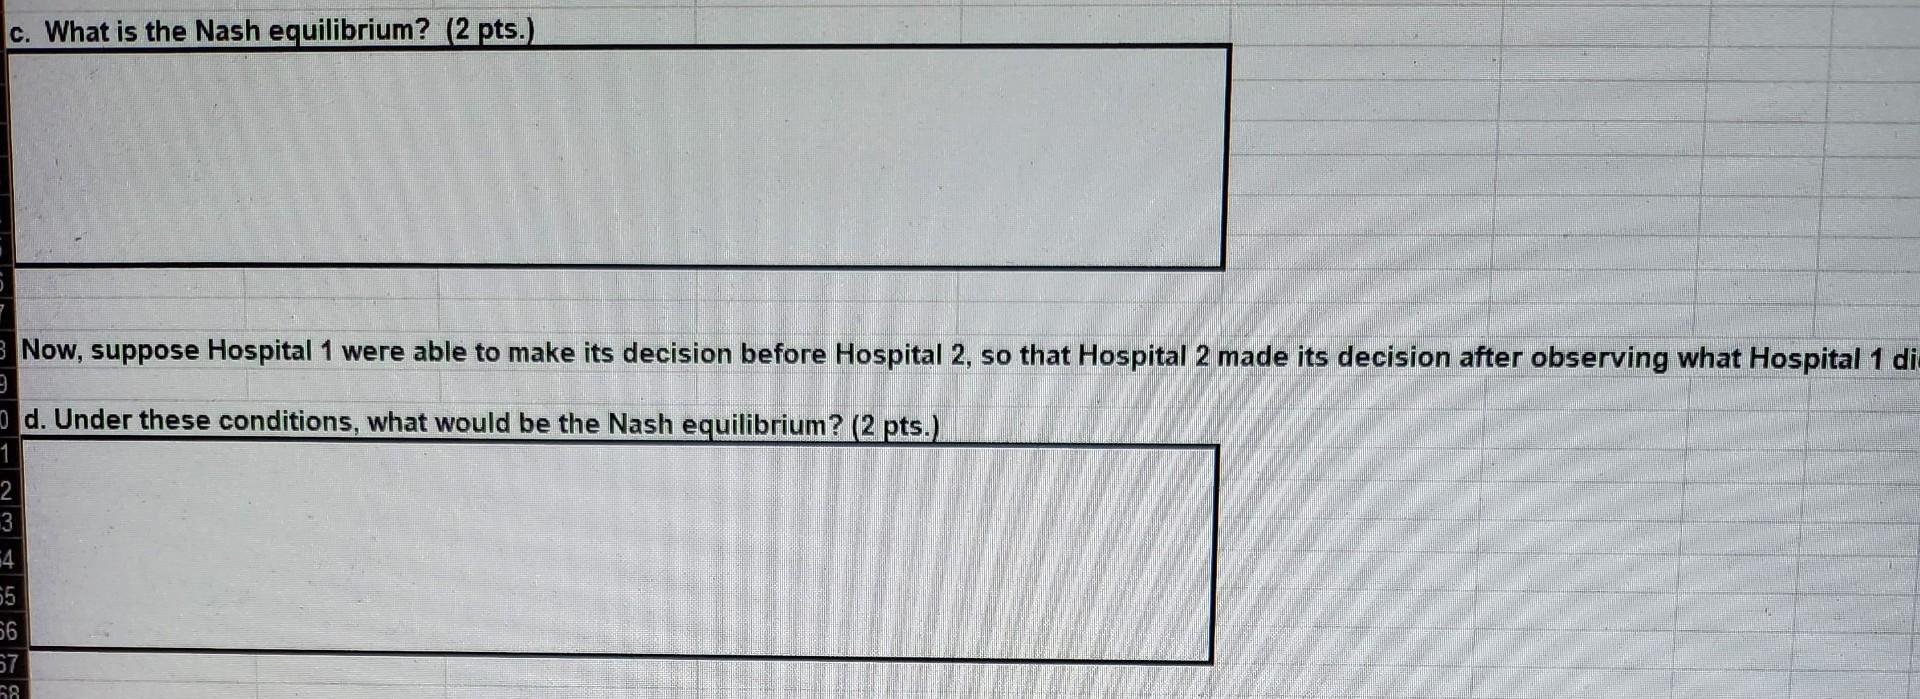 Now, suppose Hospital 1 were able to make its decision before Hospital 2, so that Hospital 2 made its decision after observin